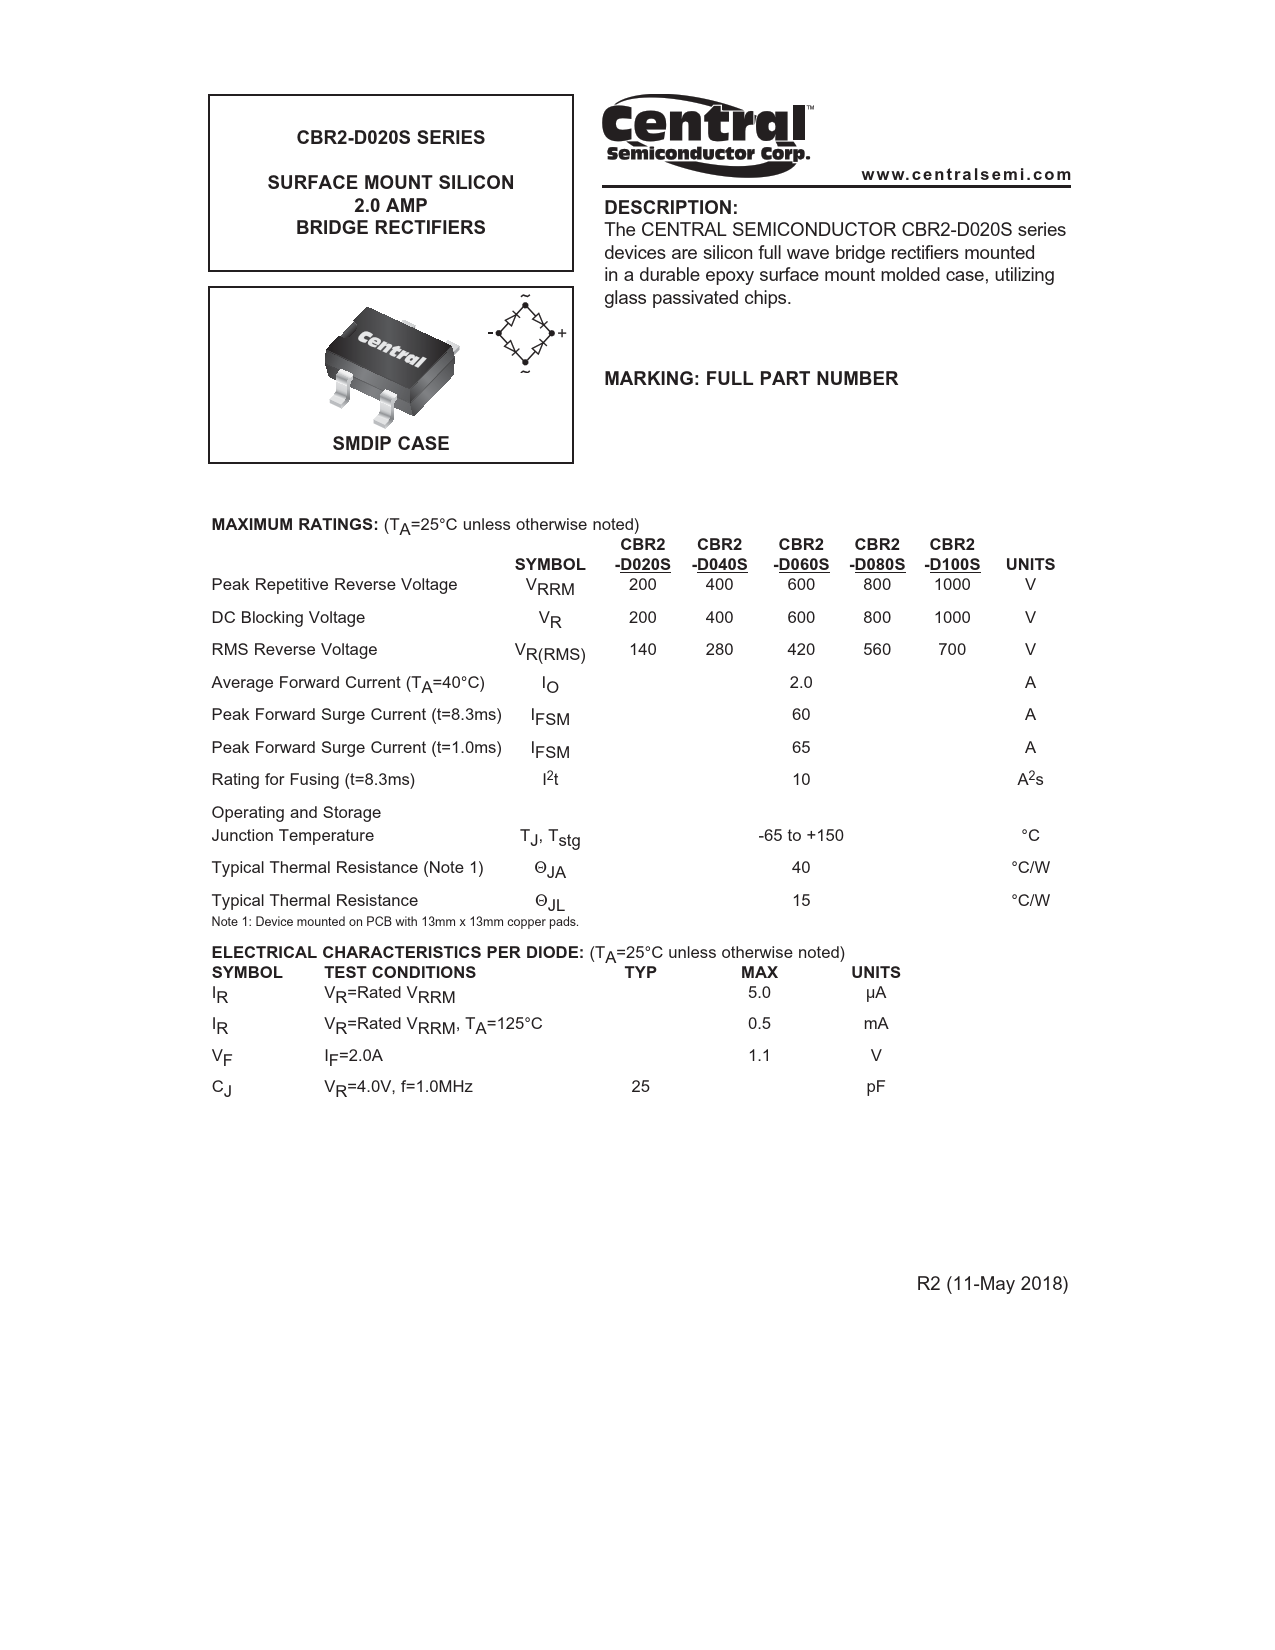 Datasheet CBR2-D020S Central Semiconductor